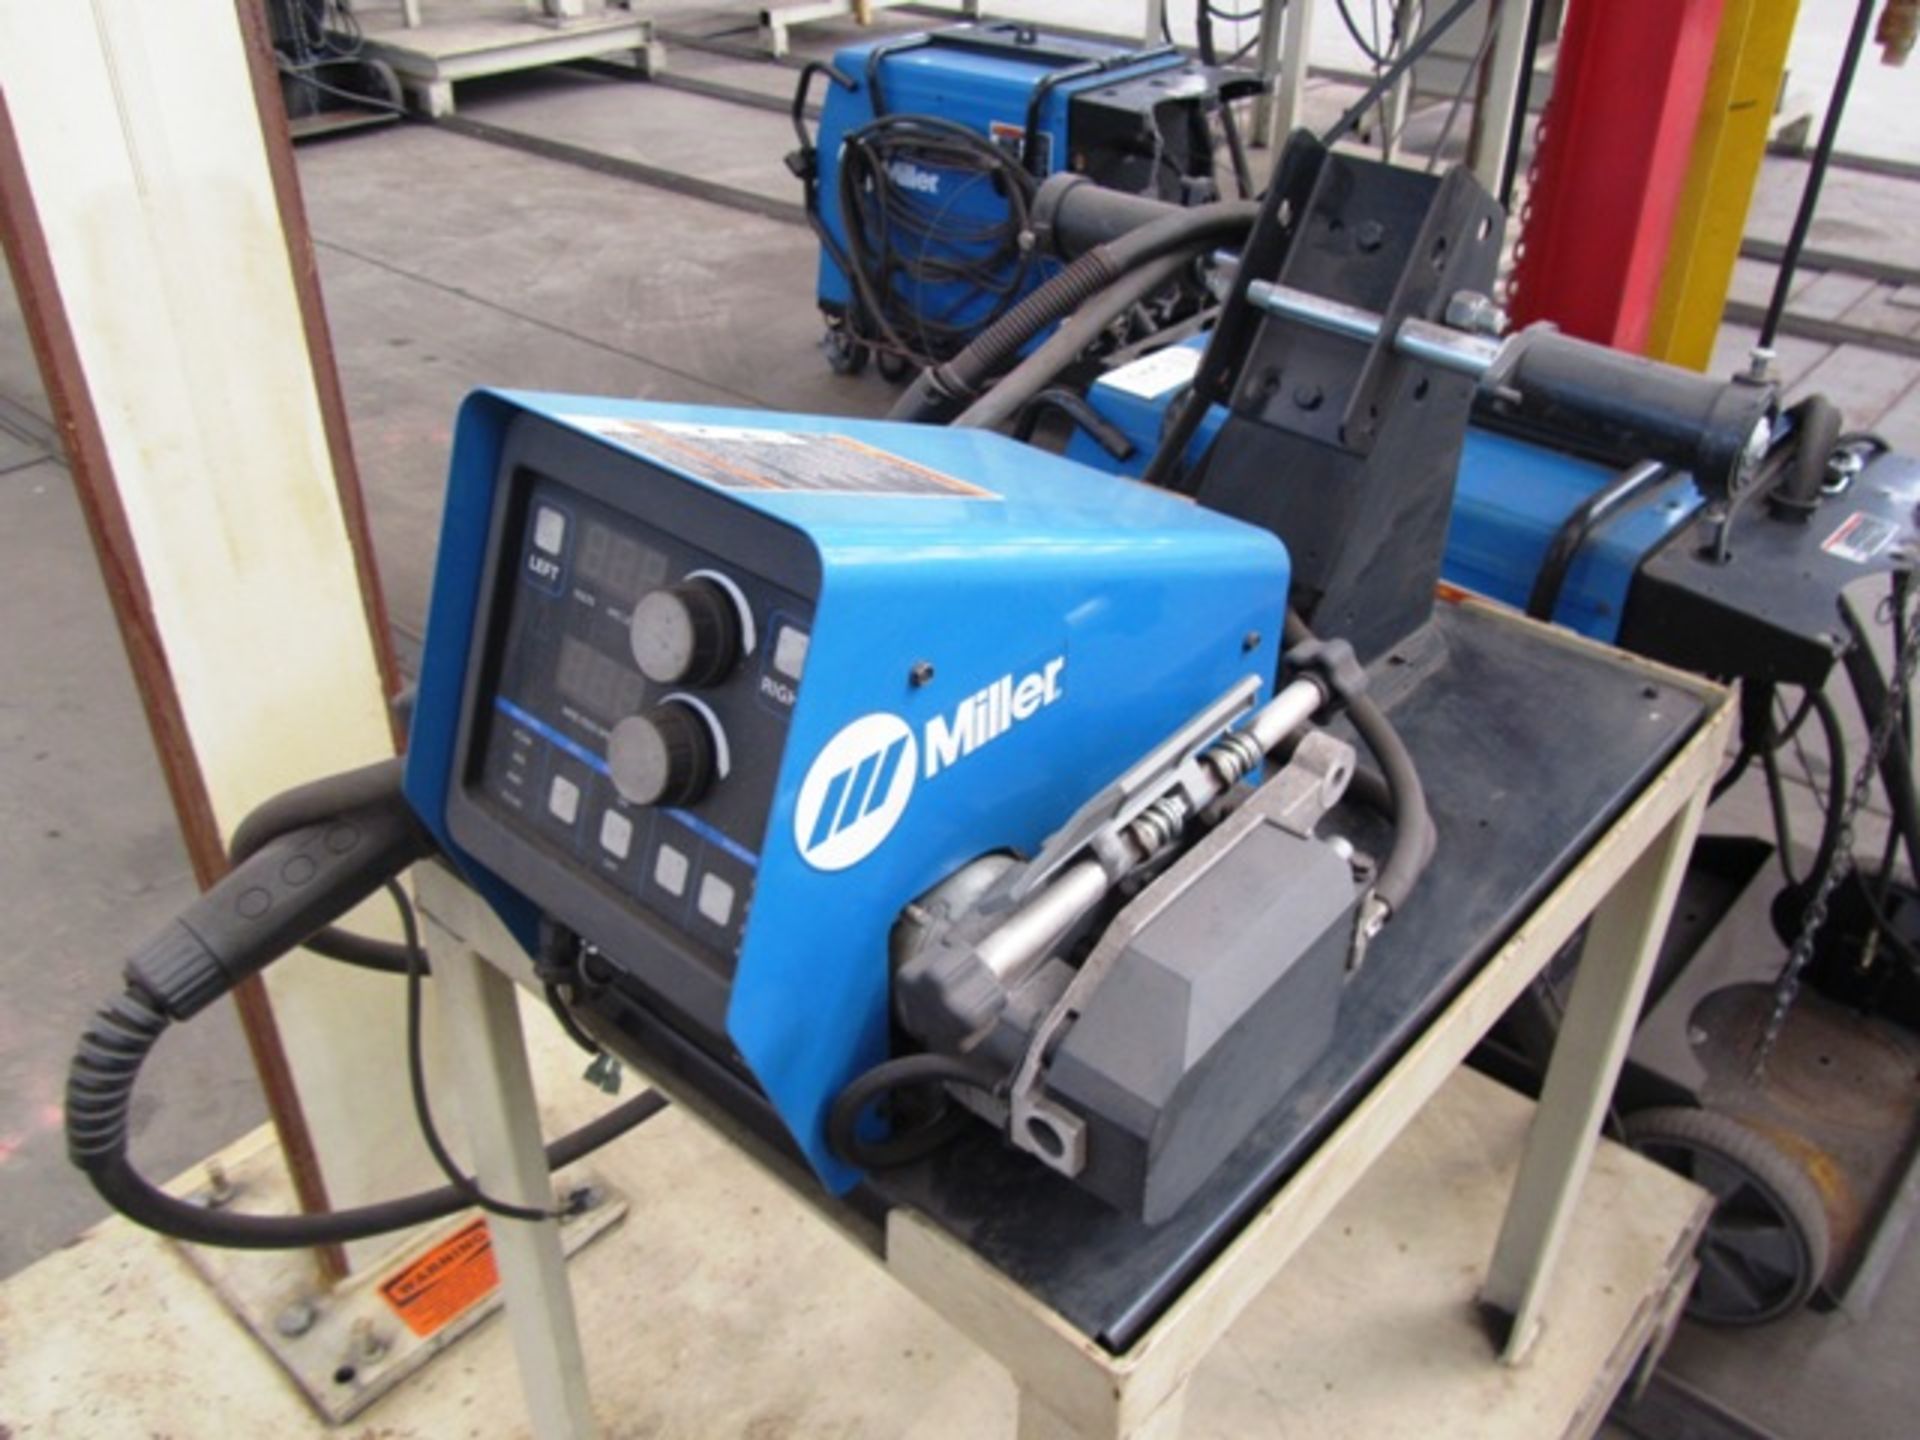 Miller PipeWorx 400 Portable Mig Welder with Miller PipeWorx Dual Wire Feeder, sn:MD130010G - Image 2 of 2